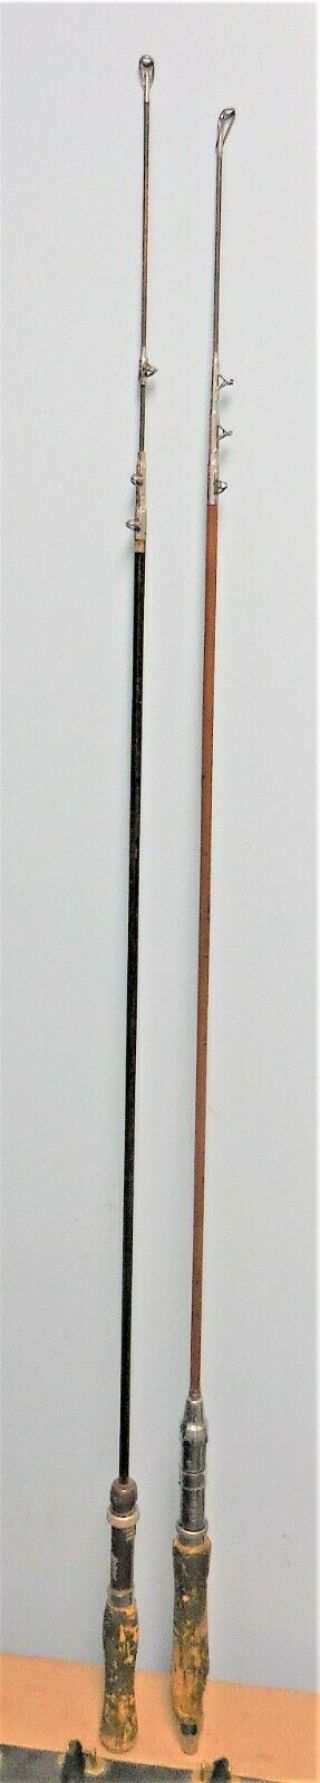 Vintage Two Telescopic Steel Fly/casting Rods By Bristol And Xpert